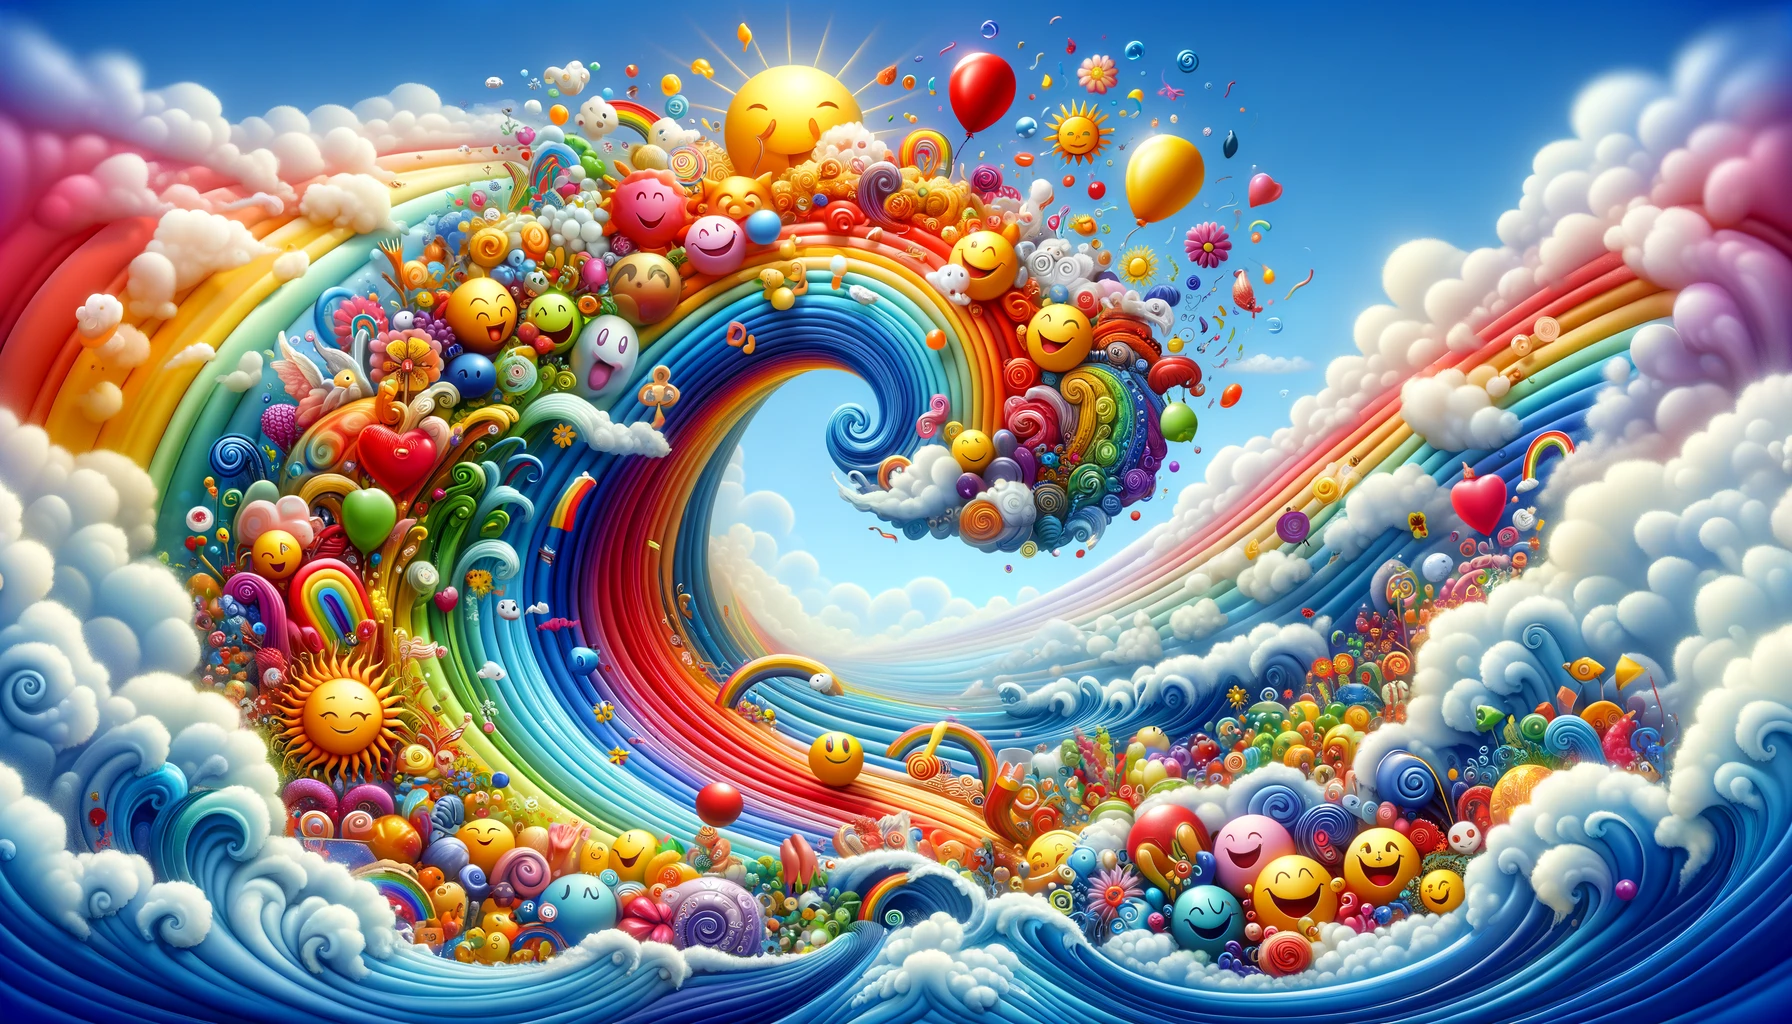 The “wave_of_happy_”: Unraveling the Ripple of Joy and Contentment